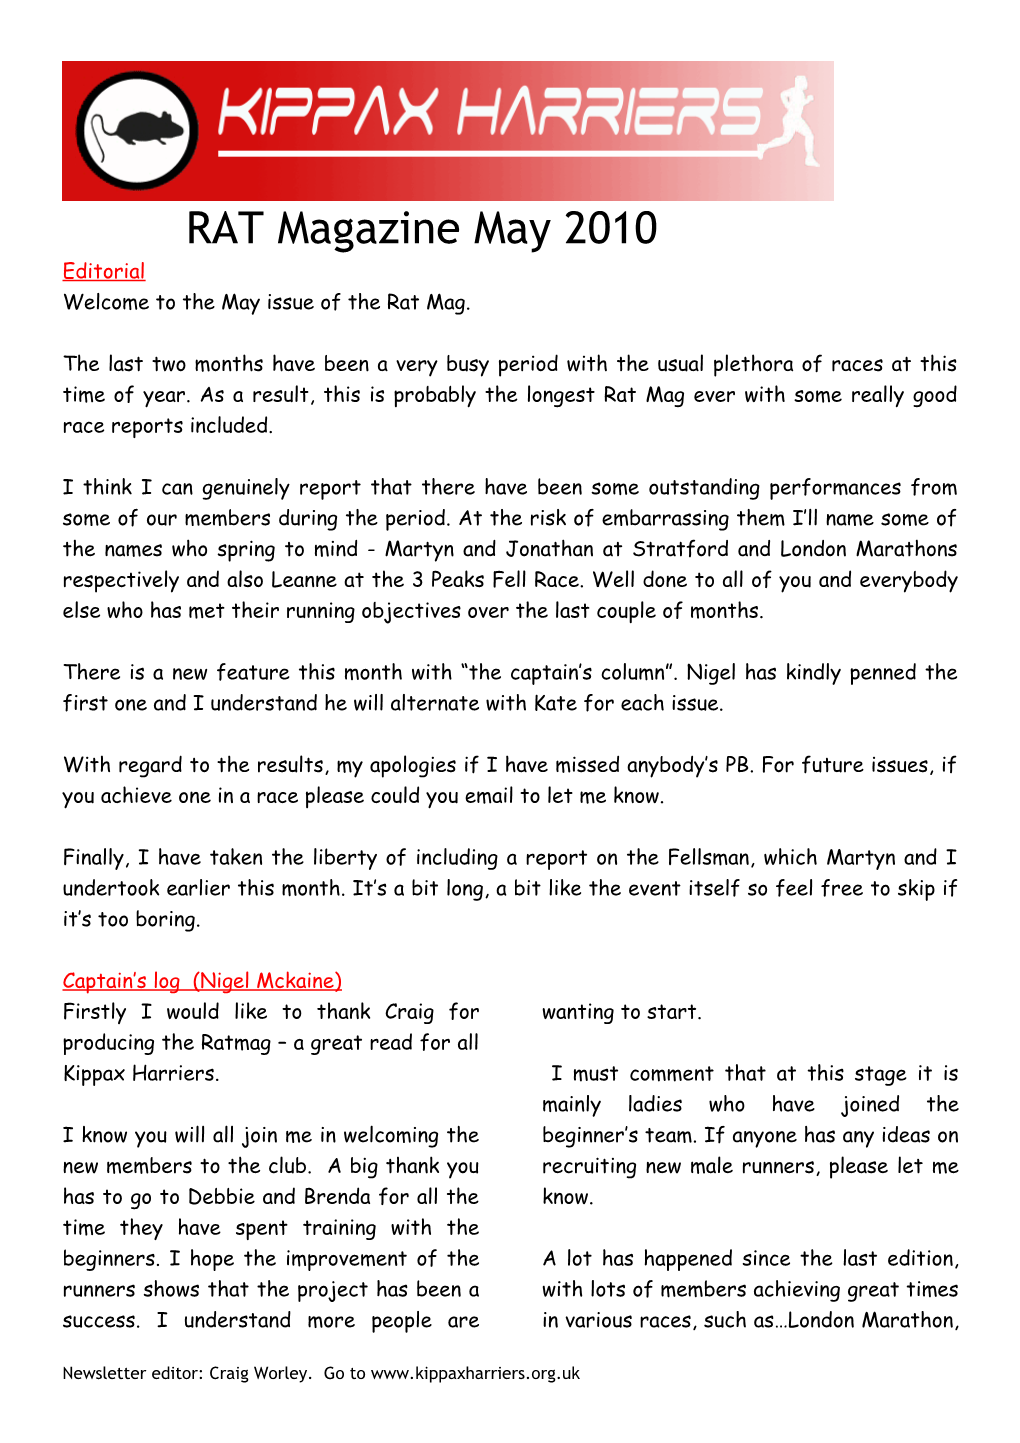 Welcome to the May Issue of the Rat Mag